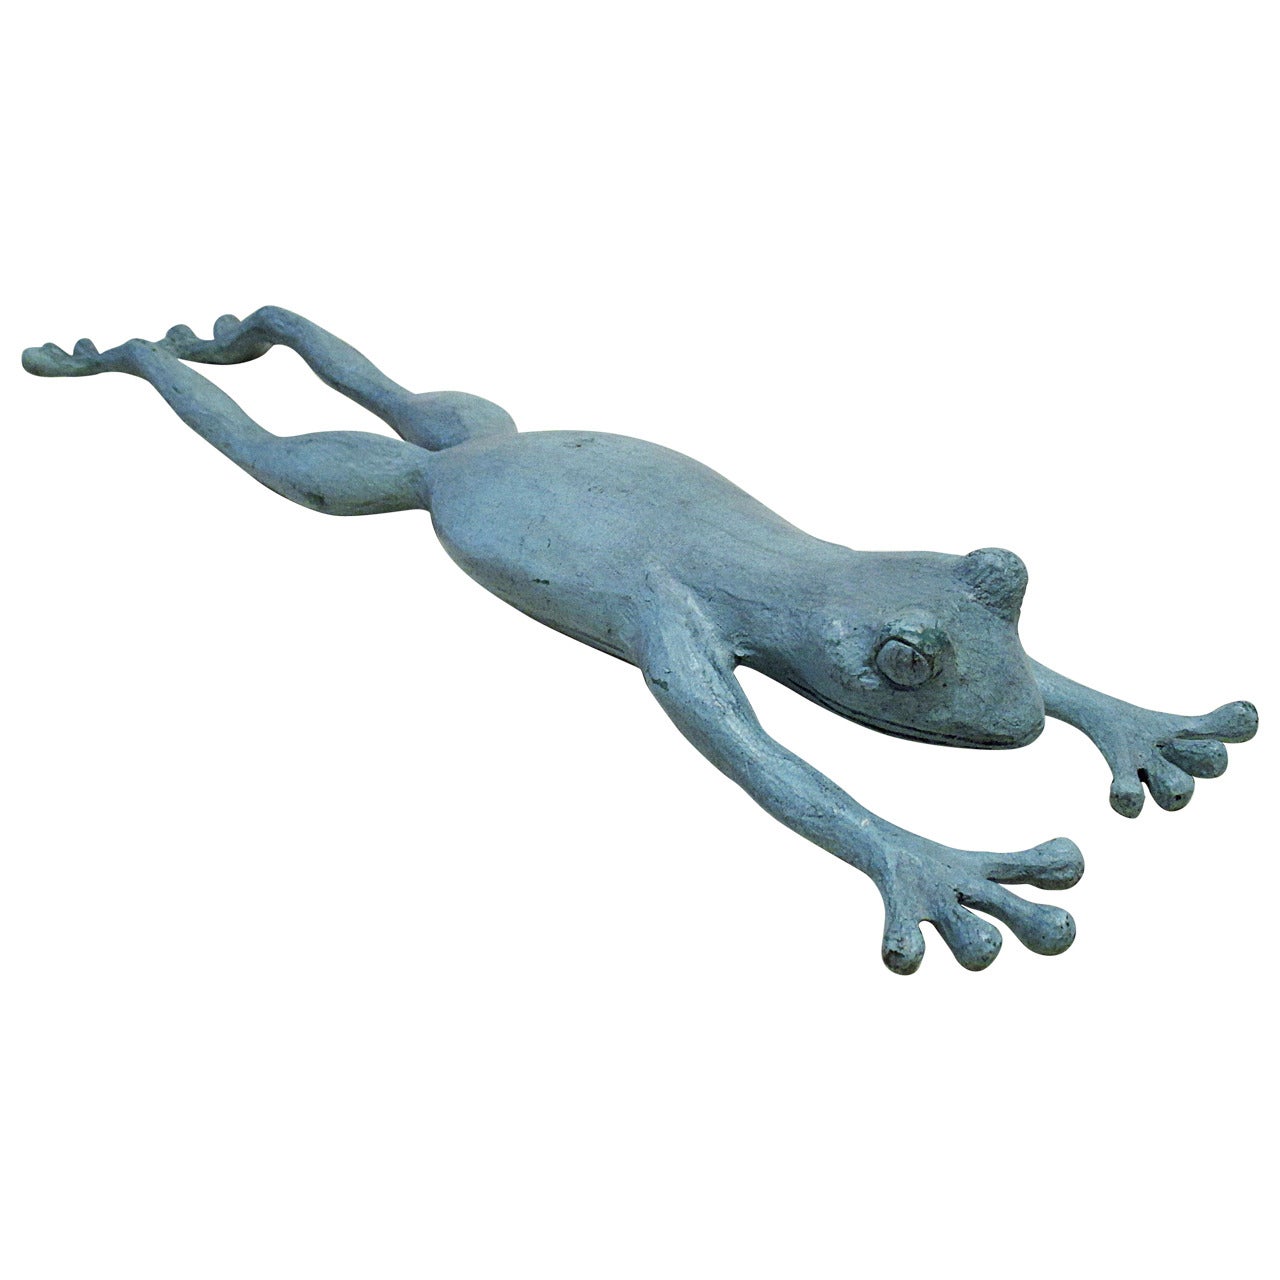 Juan Soriano Signed Bronze Sculpture of Frog on Blue Patina 4/6